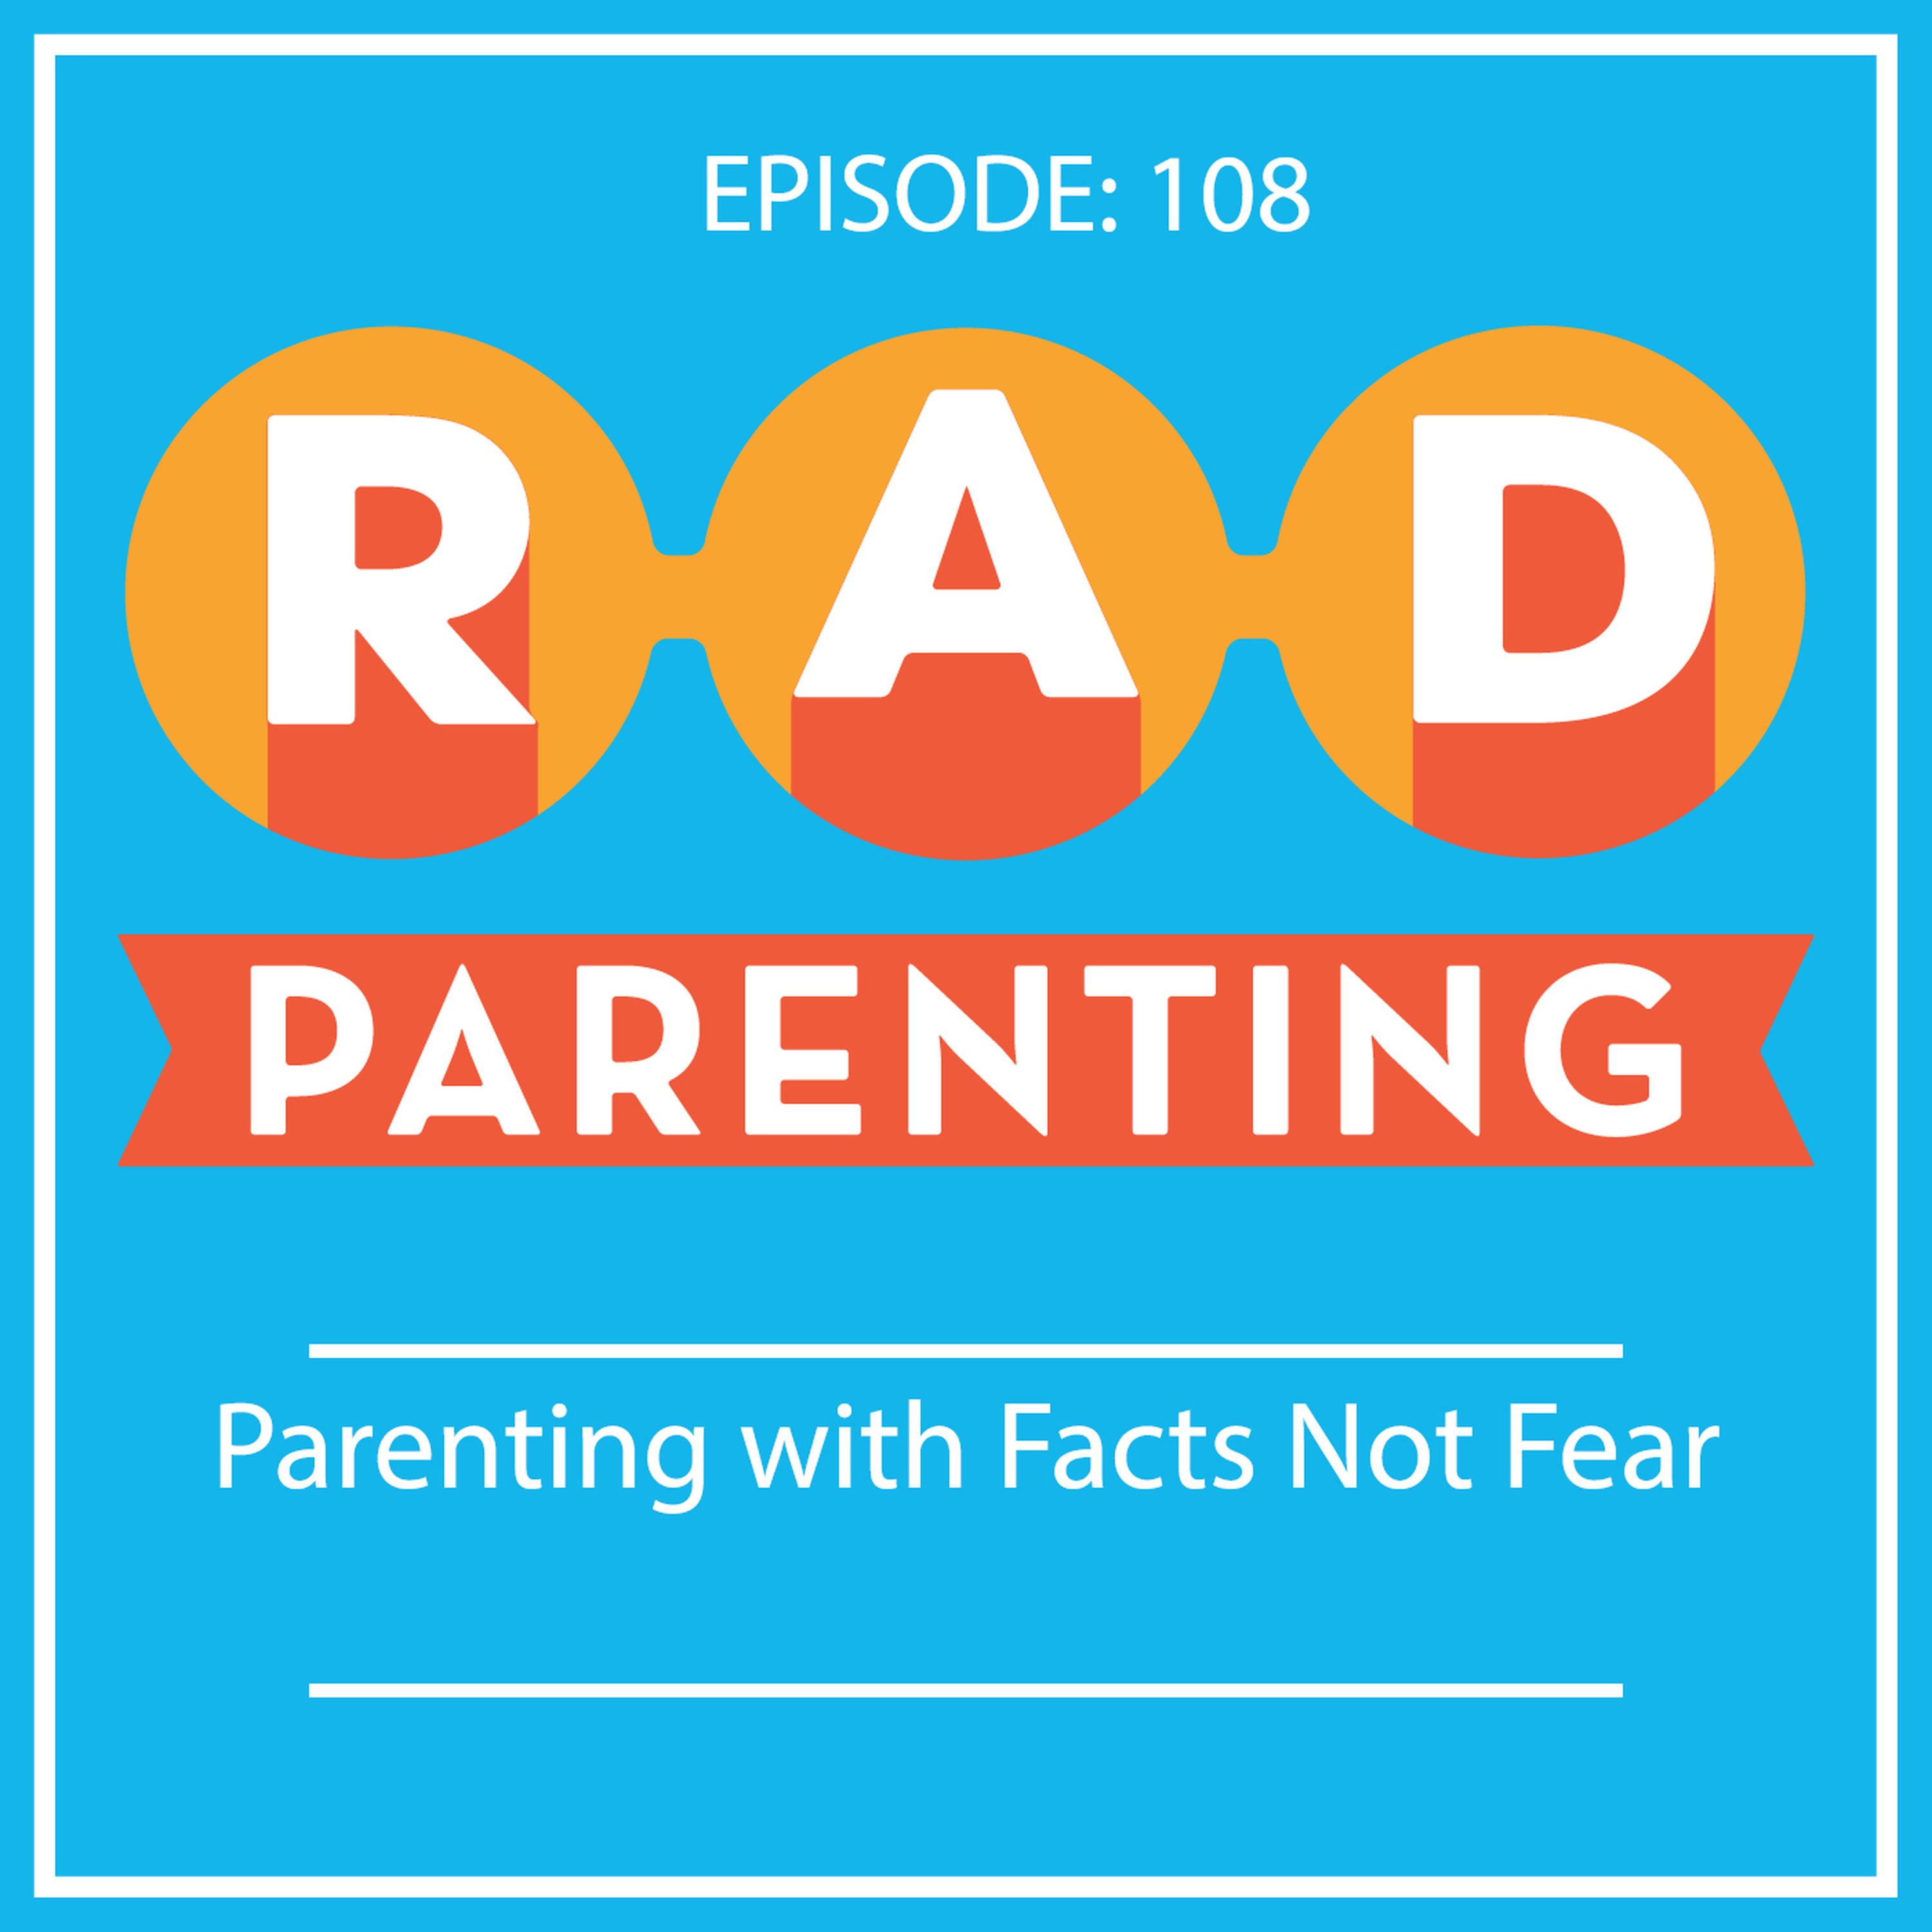 Parenting with Facts Not Fear